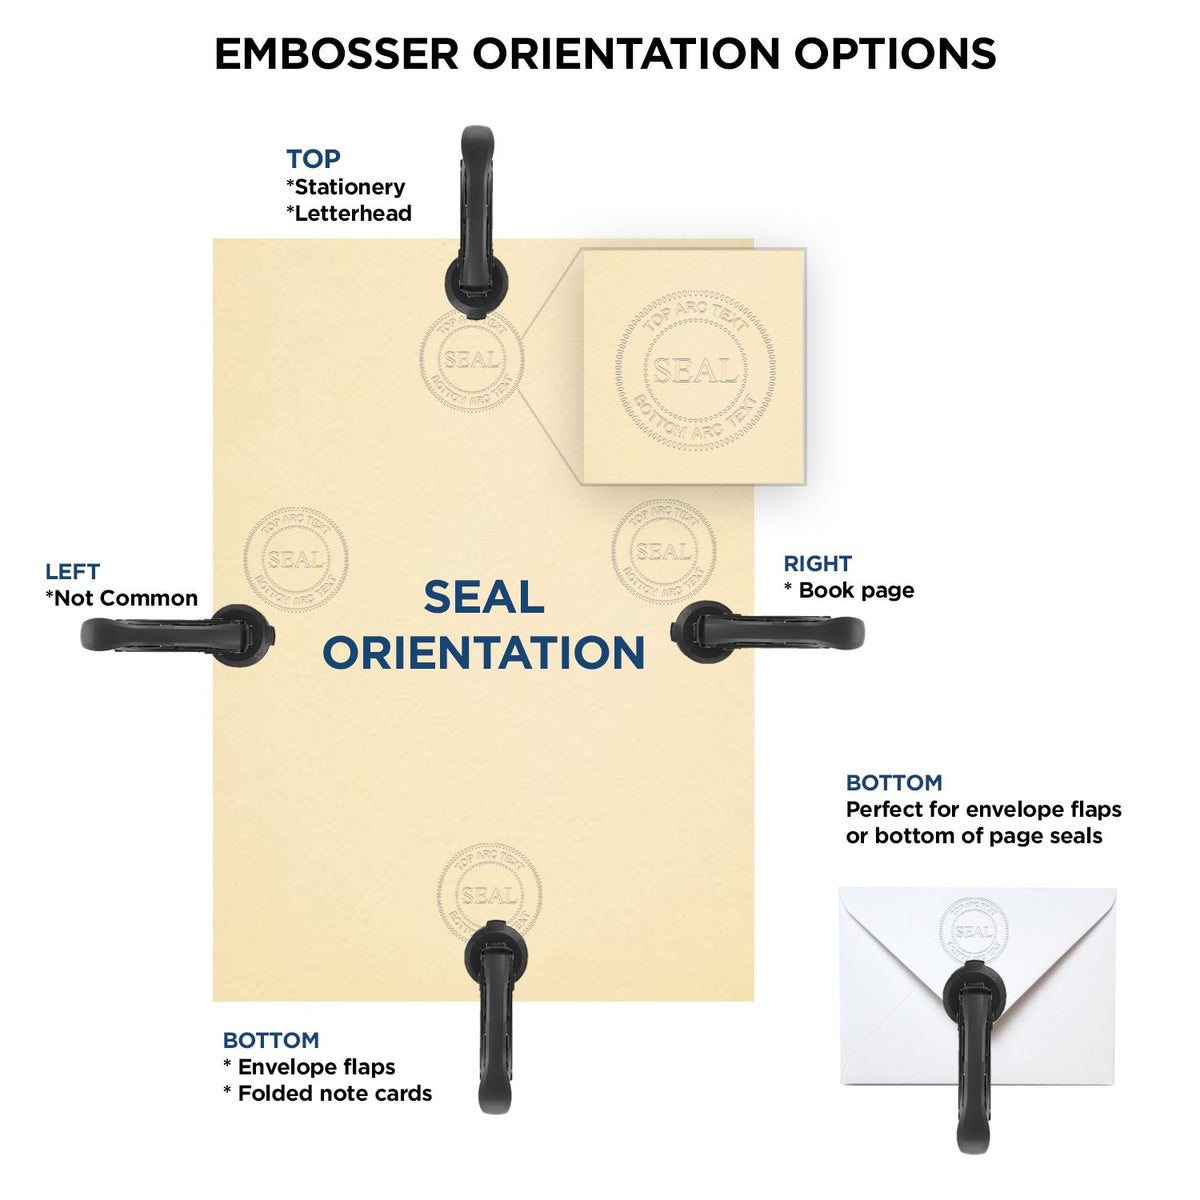 An infographic for the Gift Michigan Land Surveyor Seal showing embosser orientation, this is showing examples of a top, bottom, right and left insert.